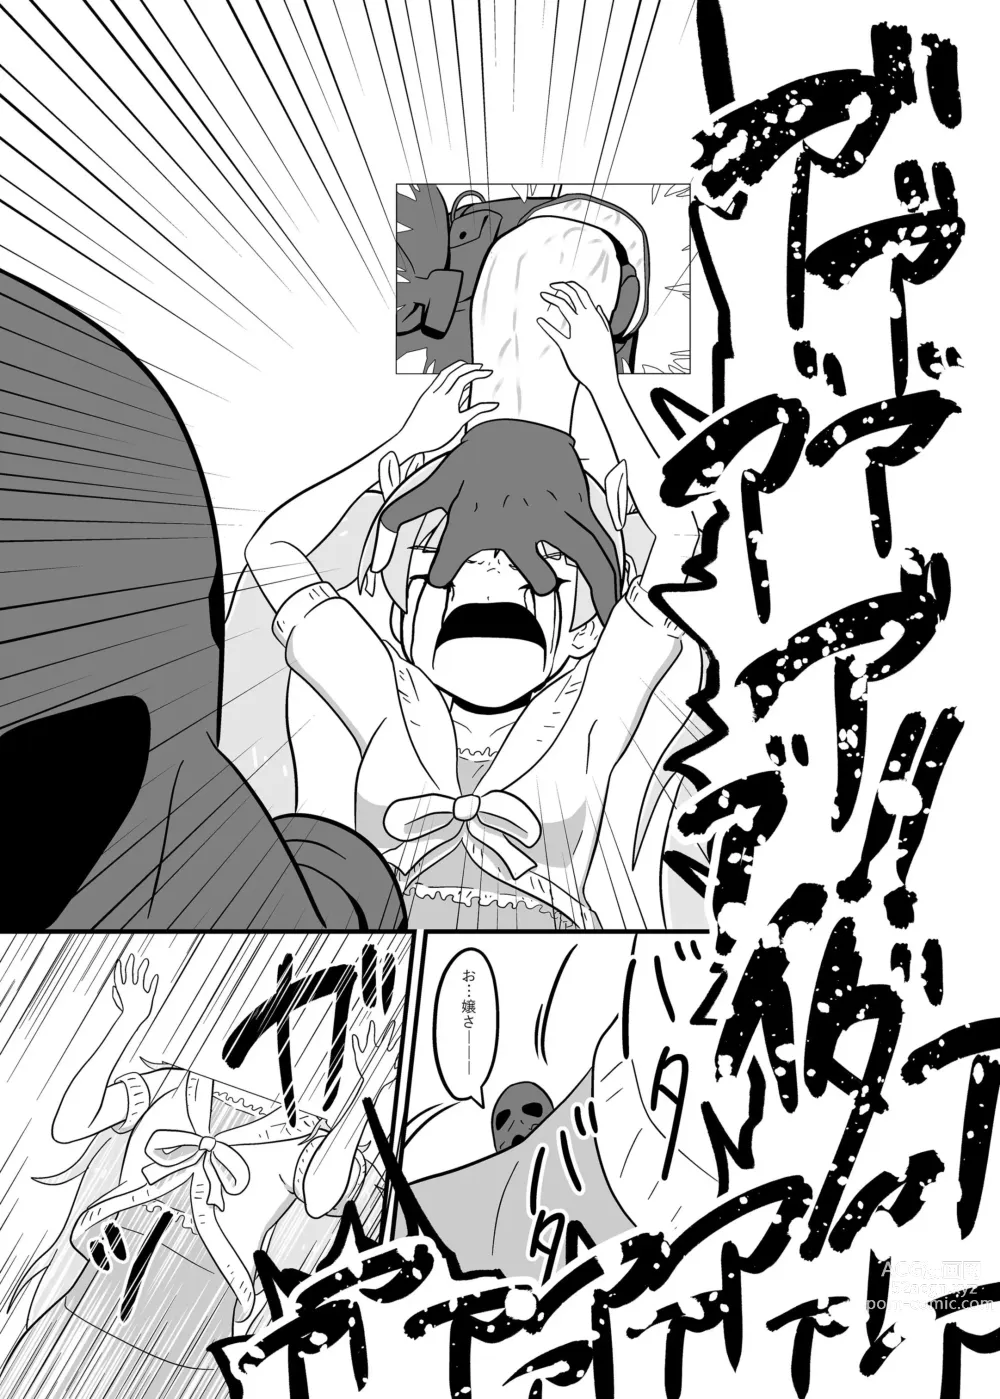 Page 160 of doujinshi MILLION THE@TER OF THE DEAD